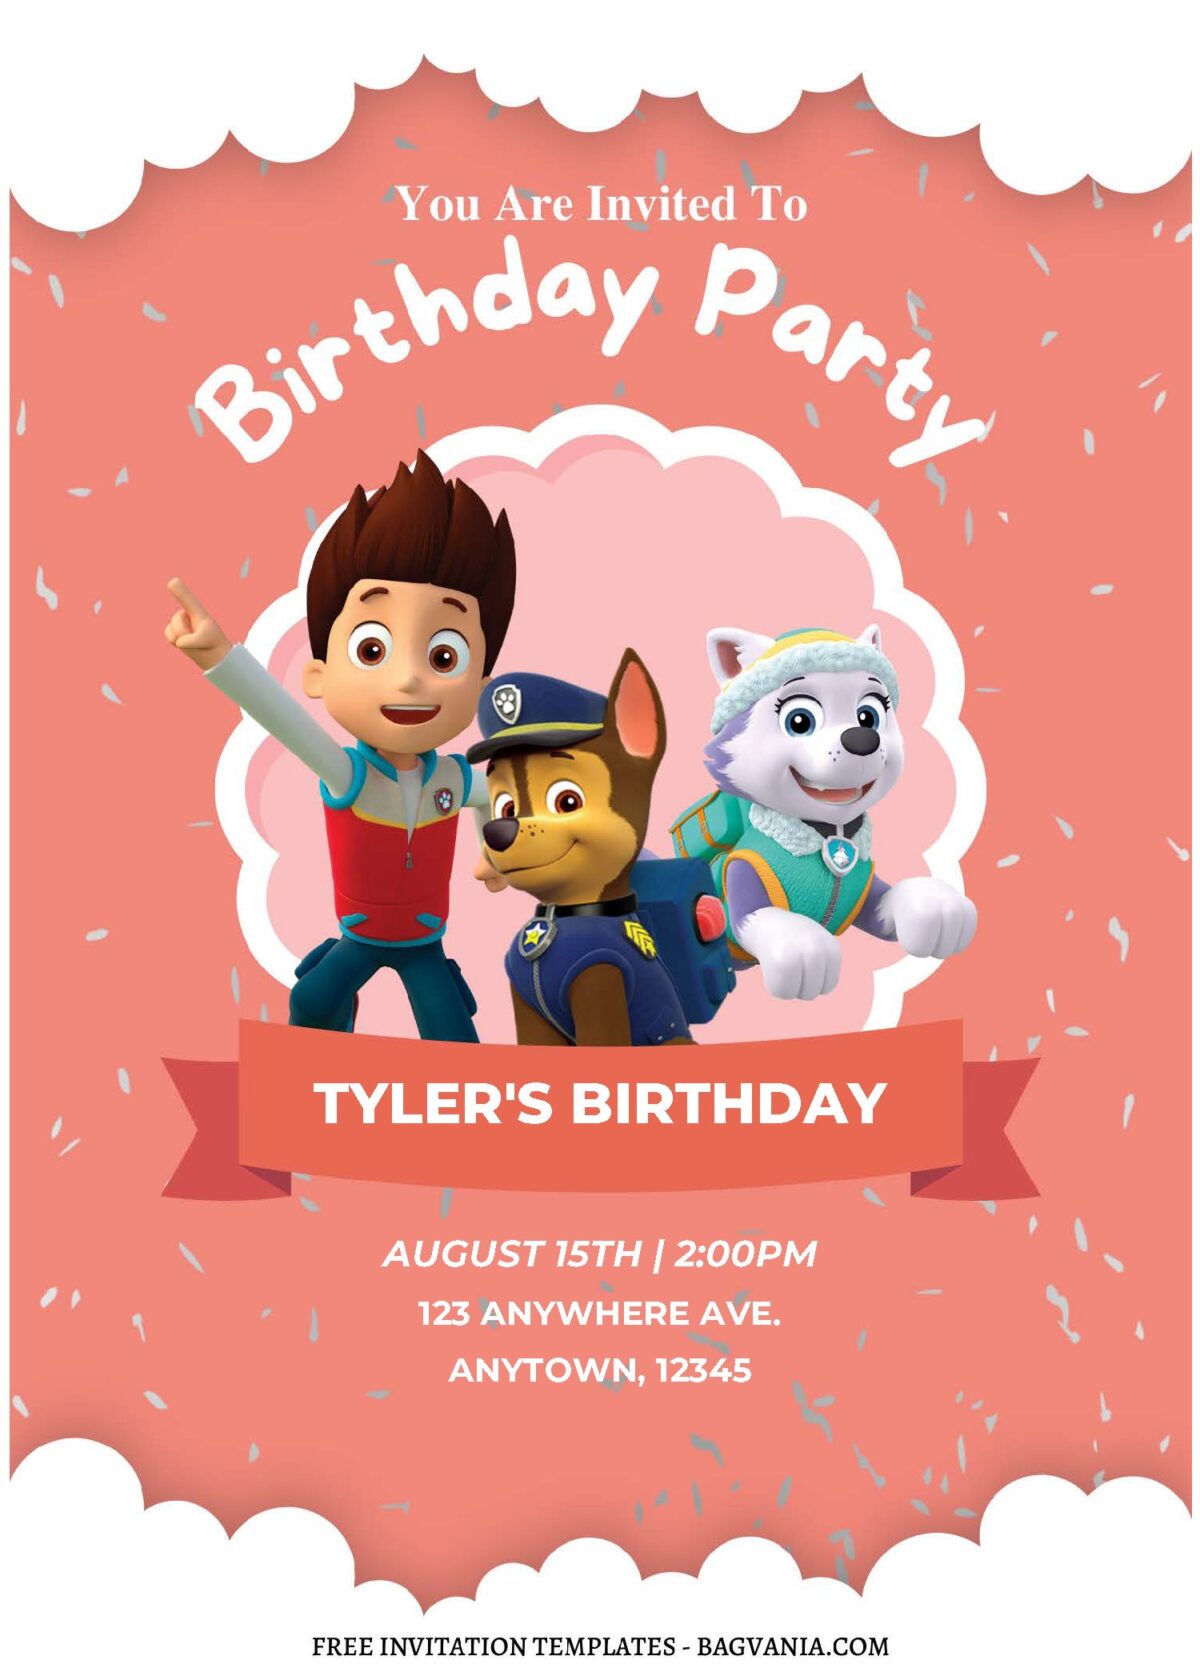 (Free Editable PDF) PAW-SOME PAW Patrol Birthday Invitation Templates with adorable pink background